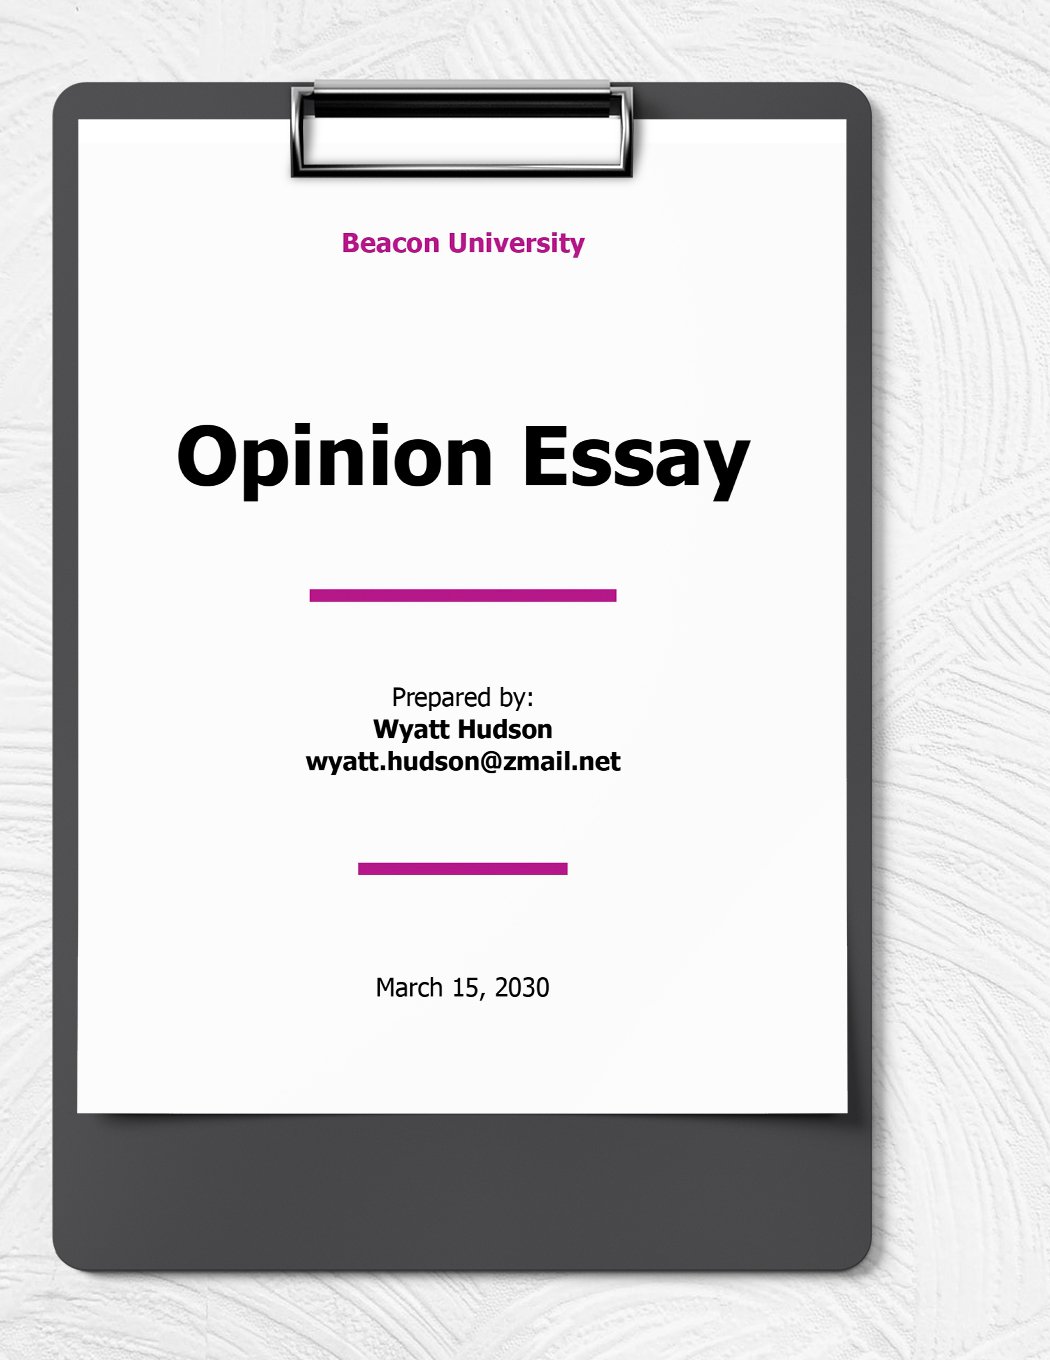 online dating opinion essay